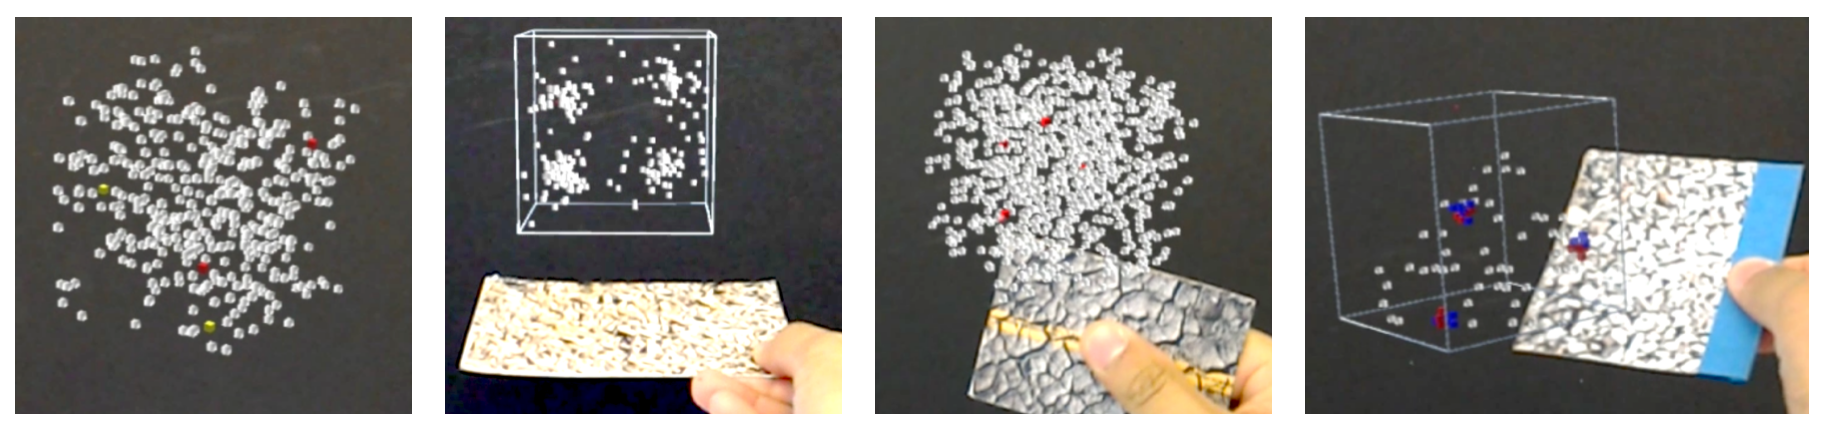 The Hologram in My Hand: How Effective is Interactive Exploration of 3D Visualizations in Immersive Tangible Augmented Reality?
